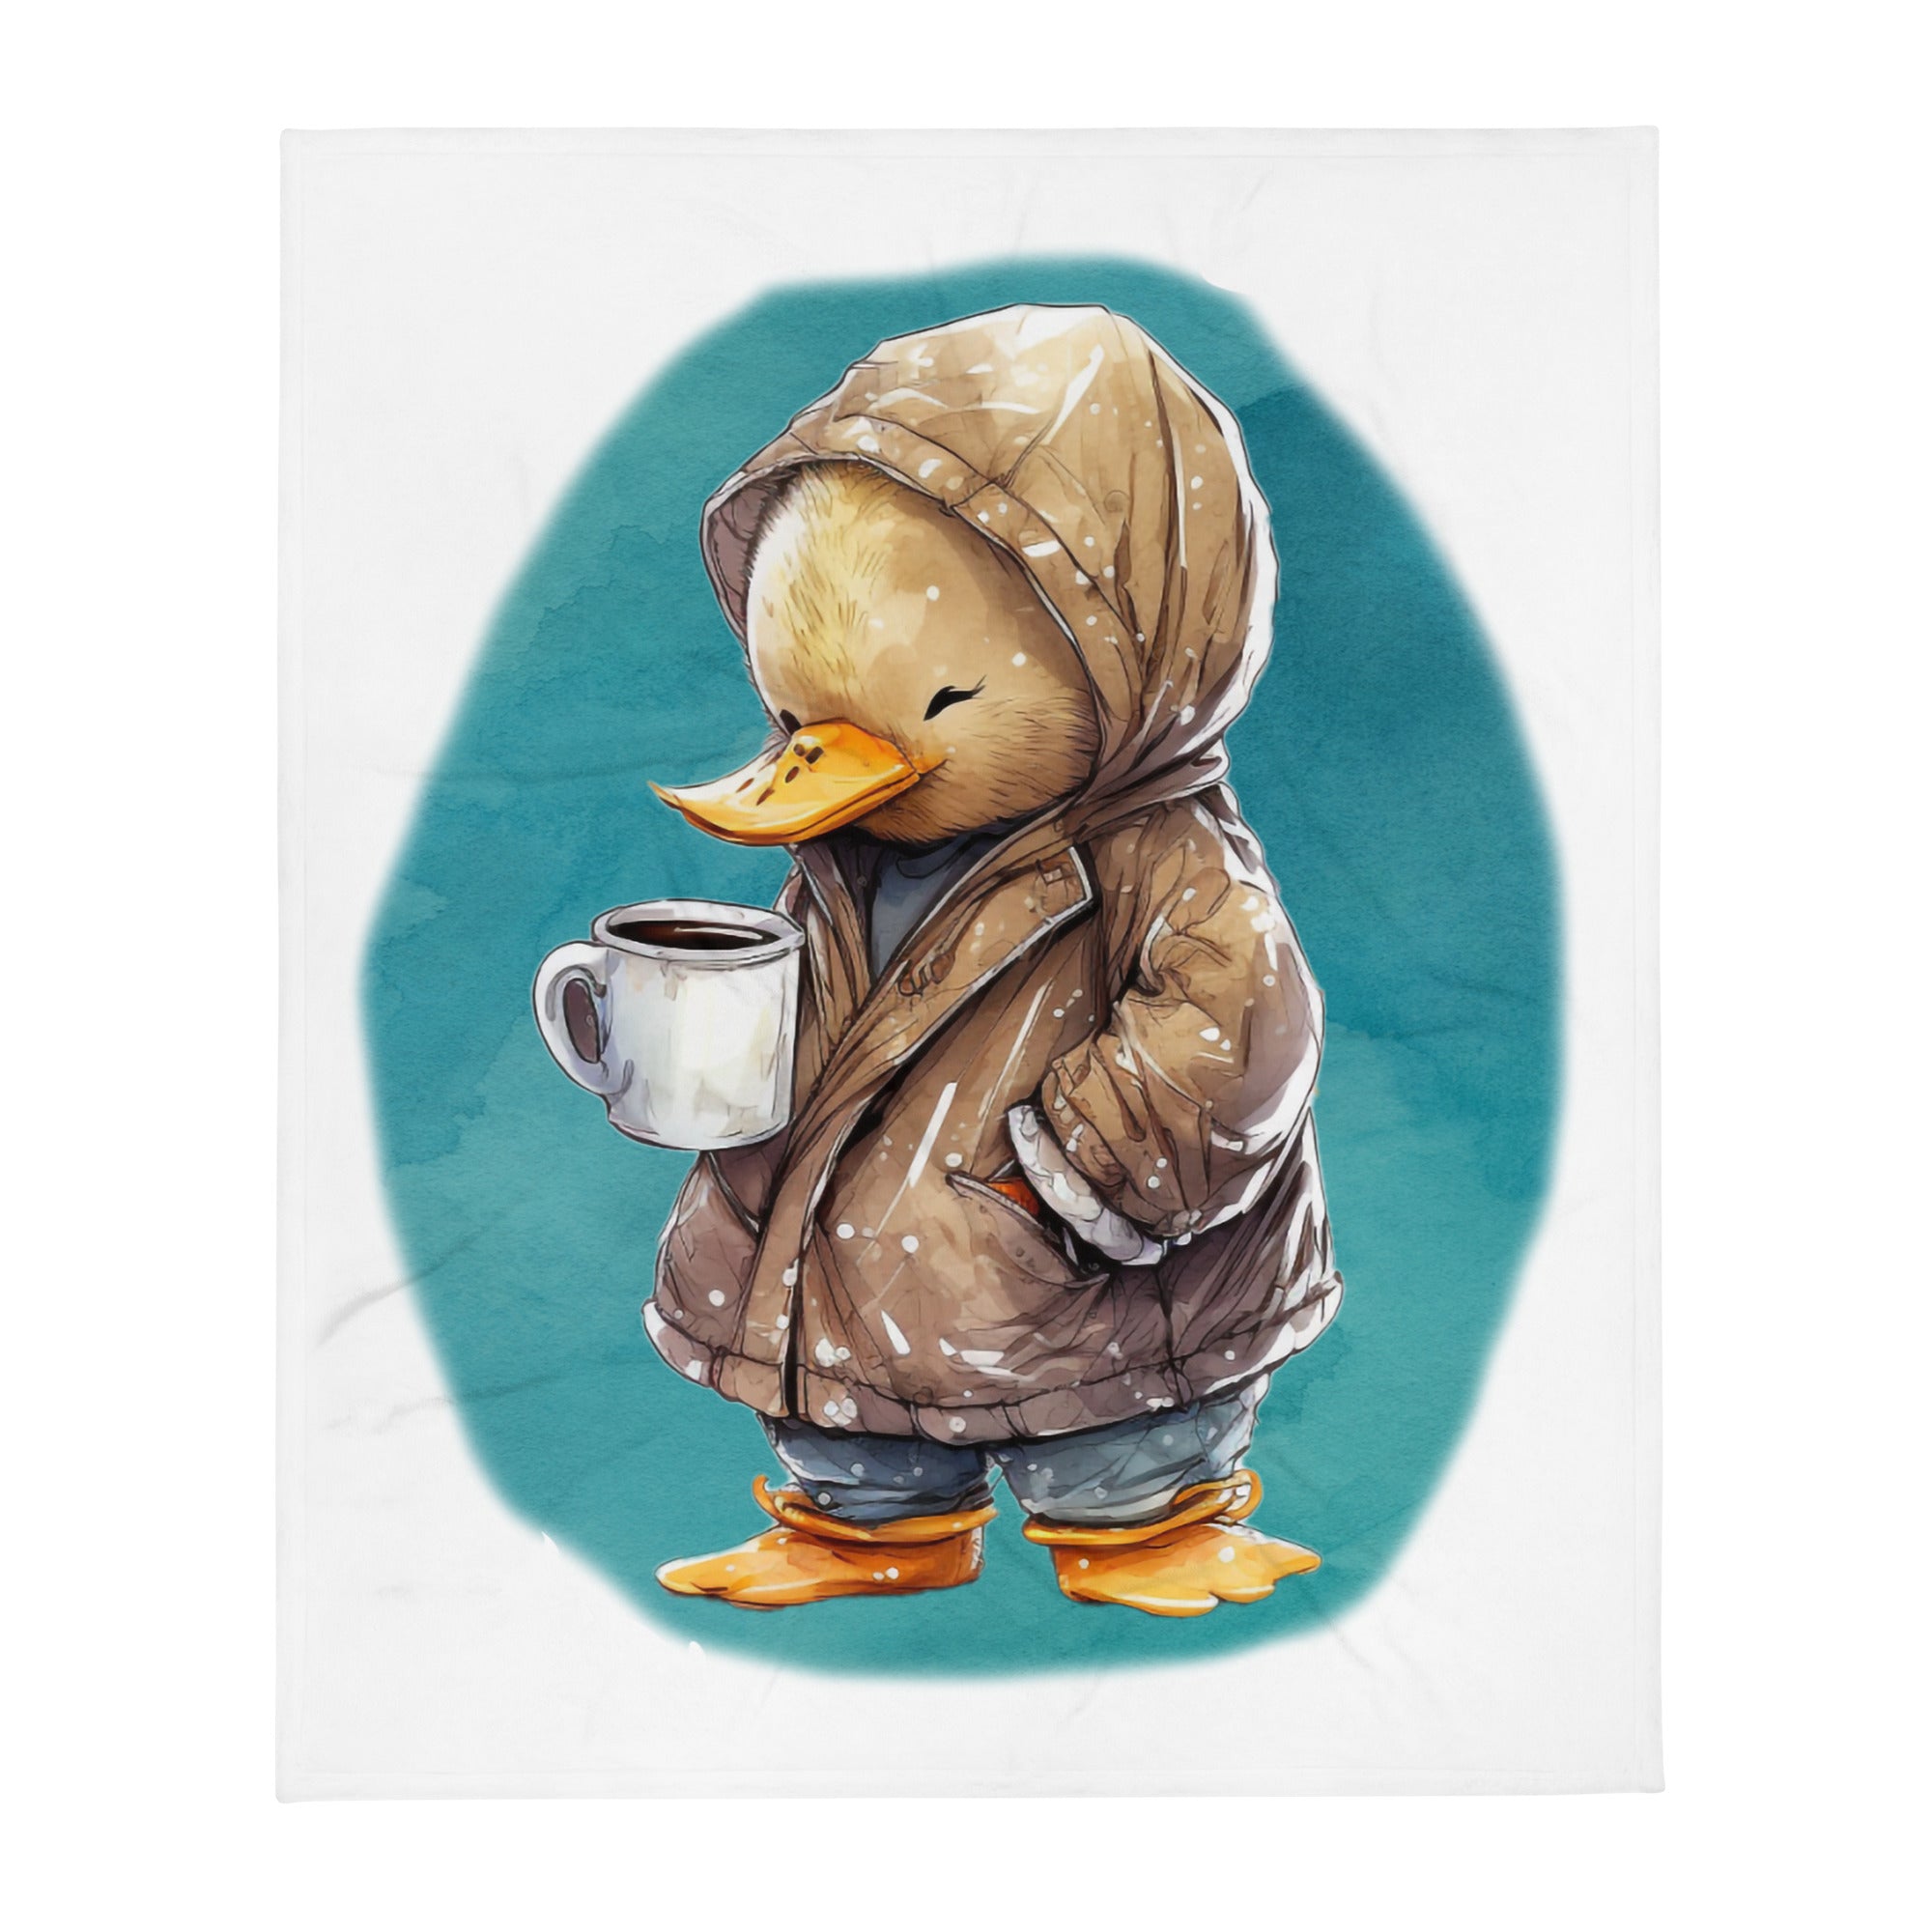 Sleepy Duck 100% Polyester Soft Silk Touch Fabric Throw Blanket - Cozy, Durable and Adorable